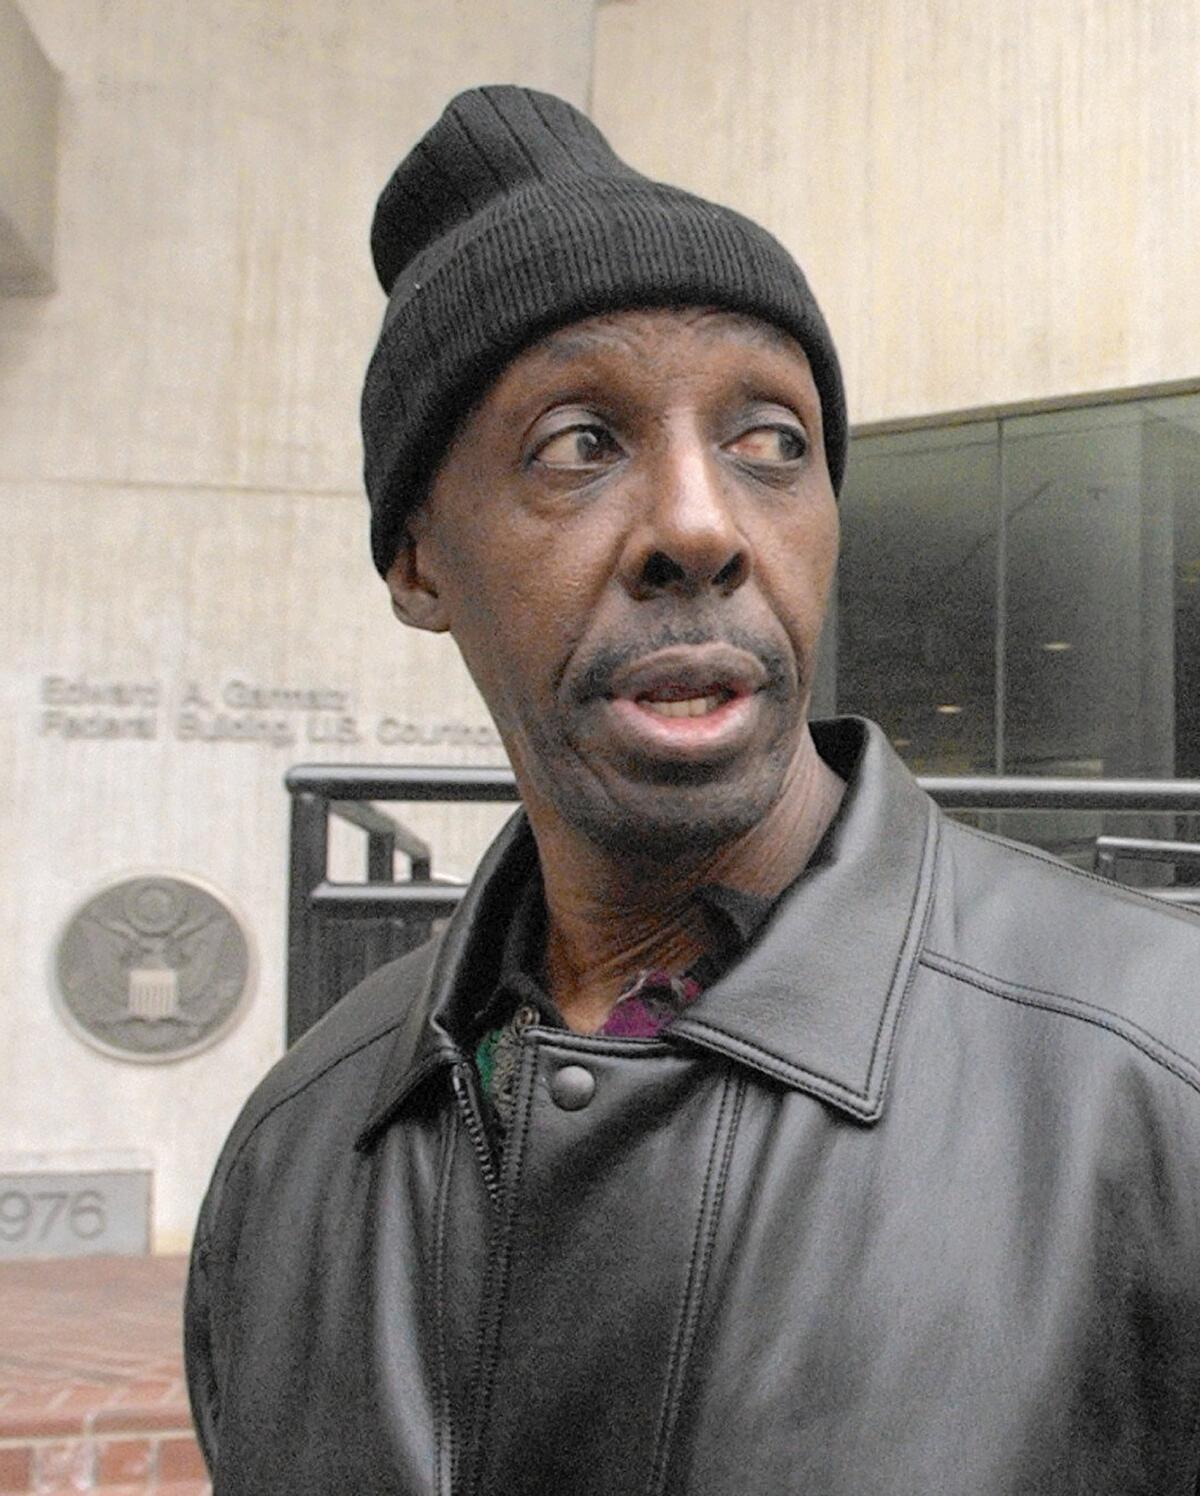 Former drug kingpin Melvin Williams is released from prison in 2003 after serving four years of a 22-year sentence. He later had a recurring role on HBO's "The Wire."